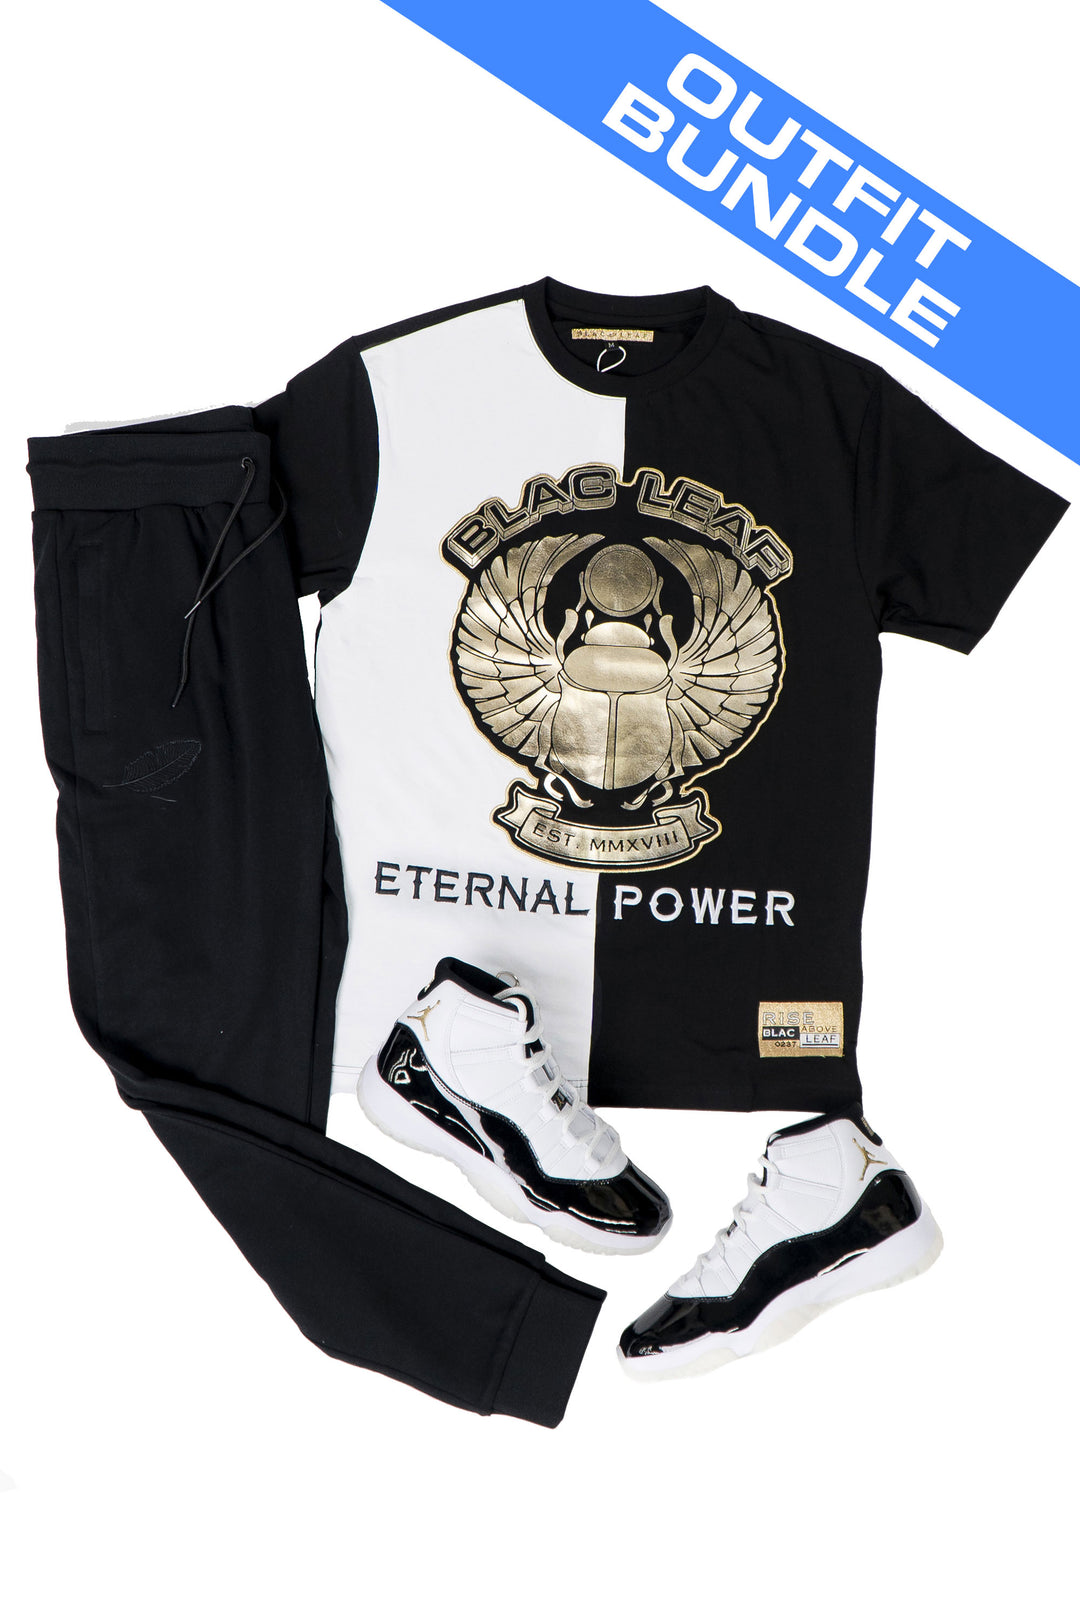 Eternal Power Full Outfit Combo